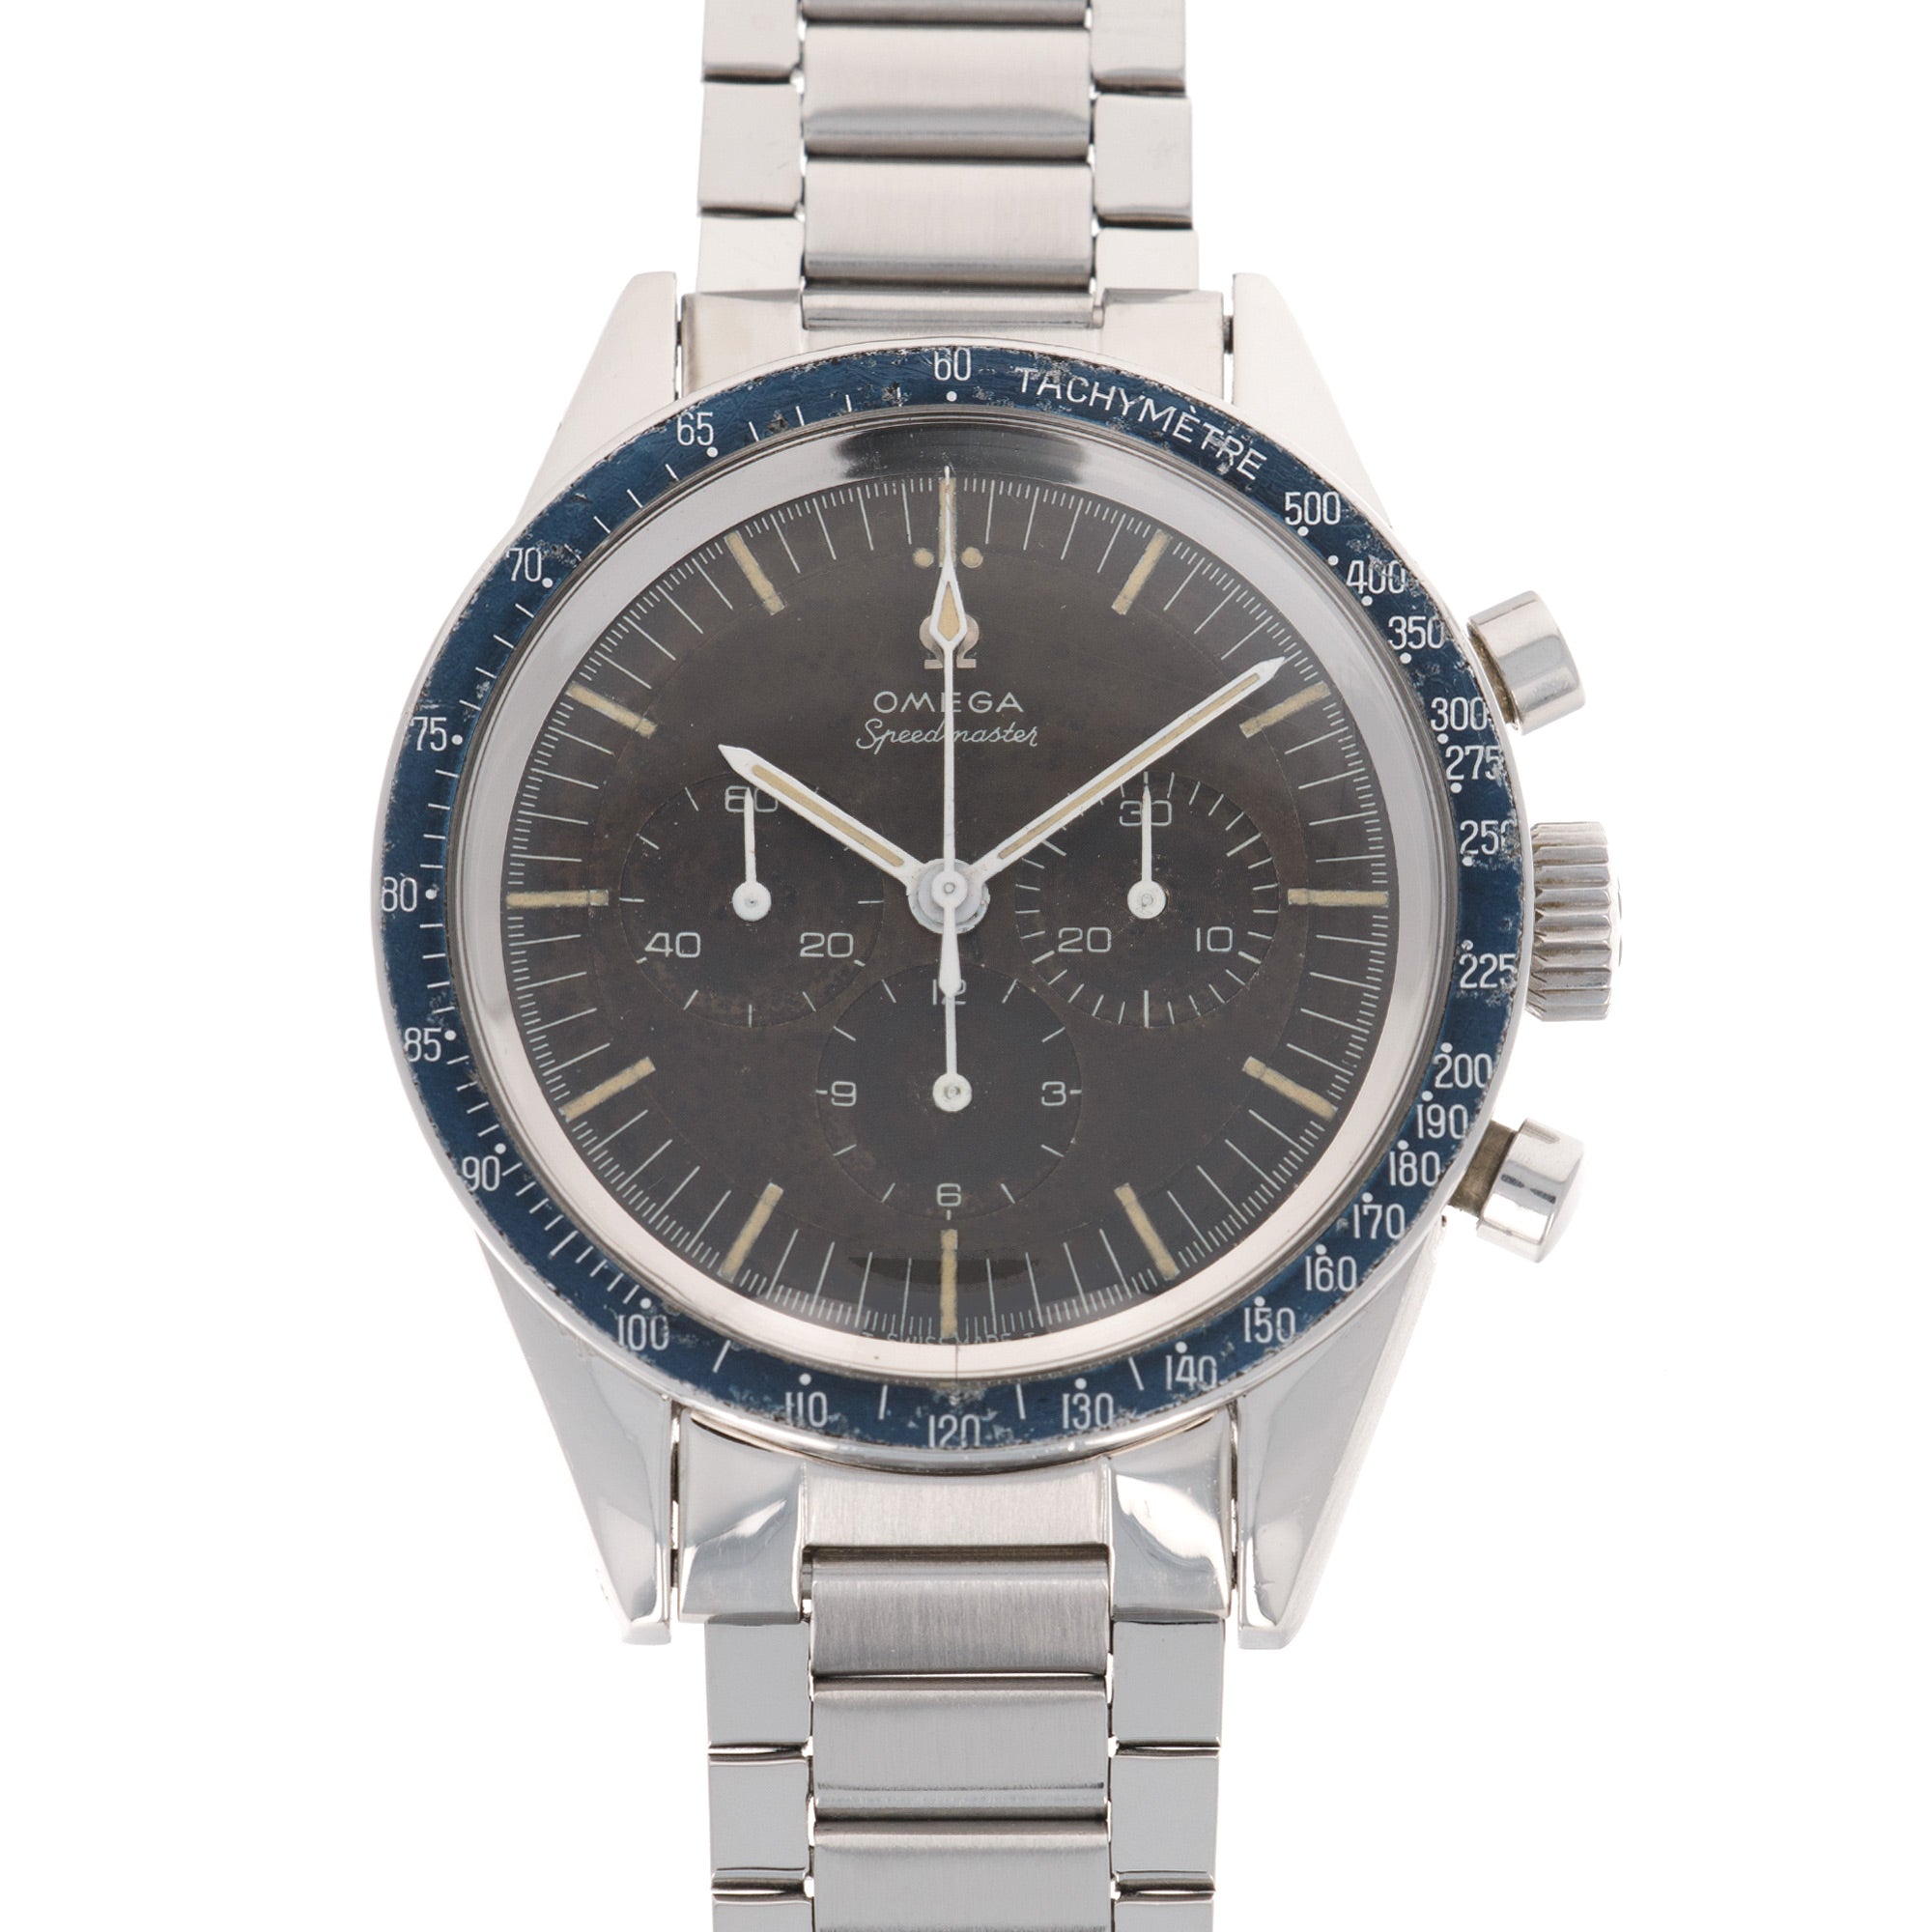 Omega - Omega Speedmaster Ed White Tropical Brown Dial Watch Ref. 105.003 - The Keystone Watches